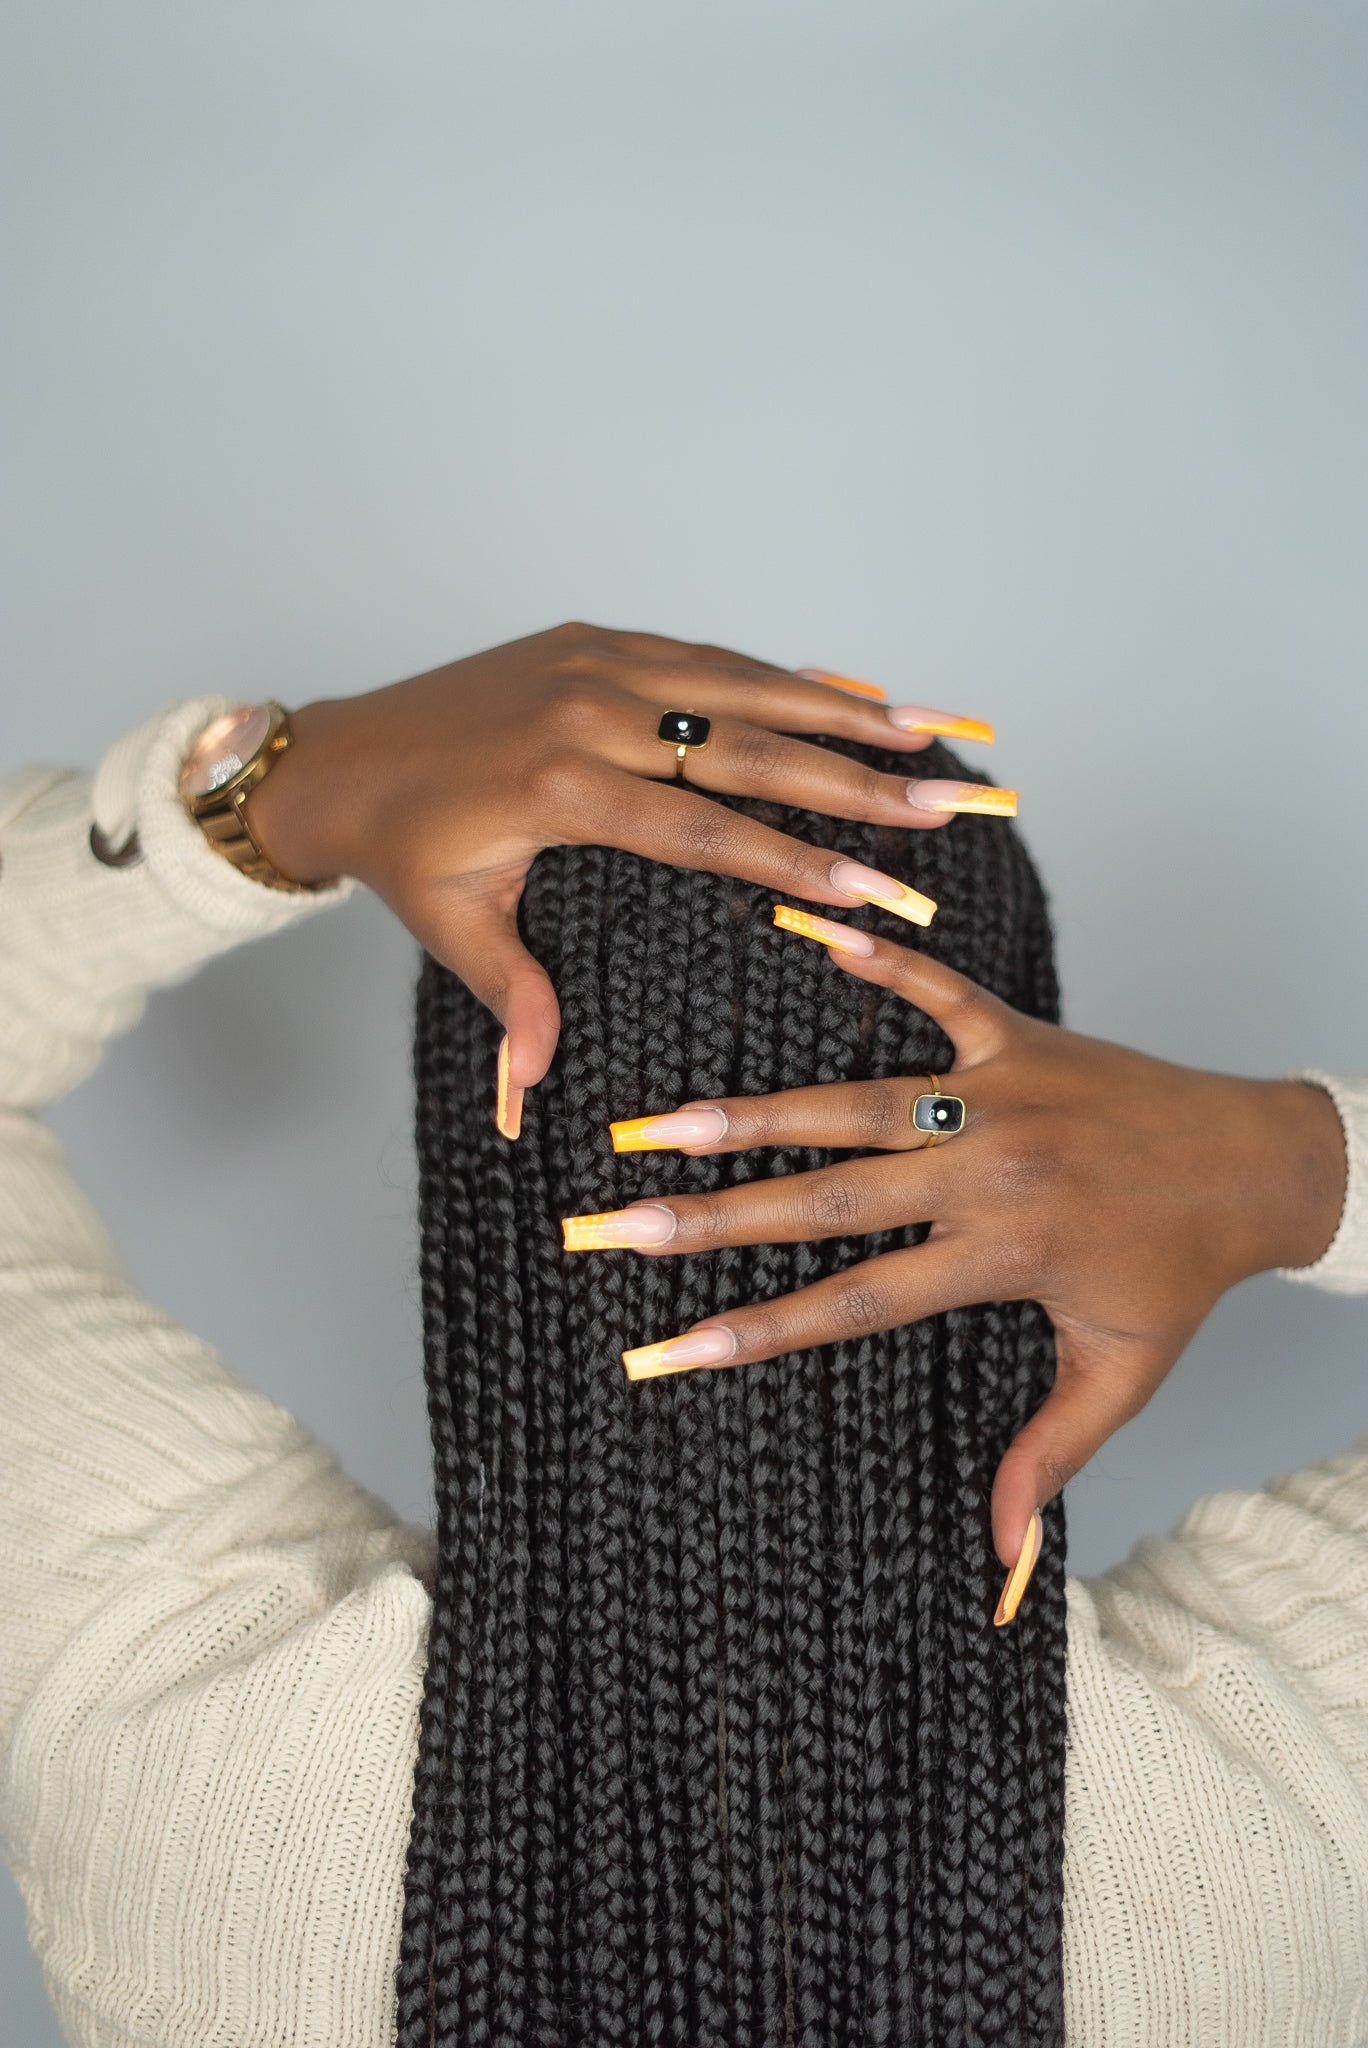 Model in a beige long-sleeve wearing 18k gold ring. Th ring has a zircon stone in the center of a flat rectangular surface in black. Infinity Zircon Ring by E's Element.